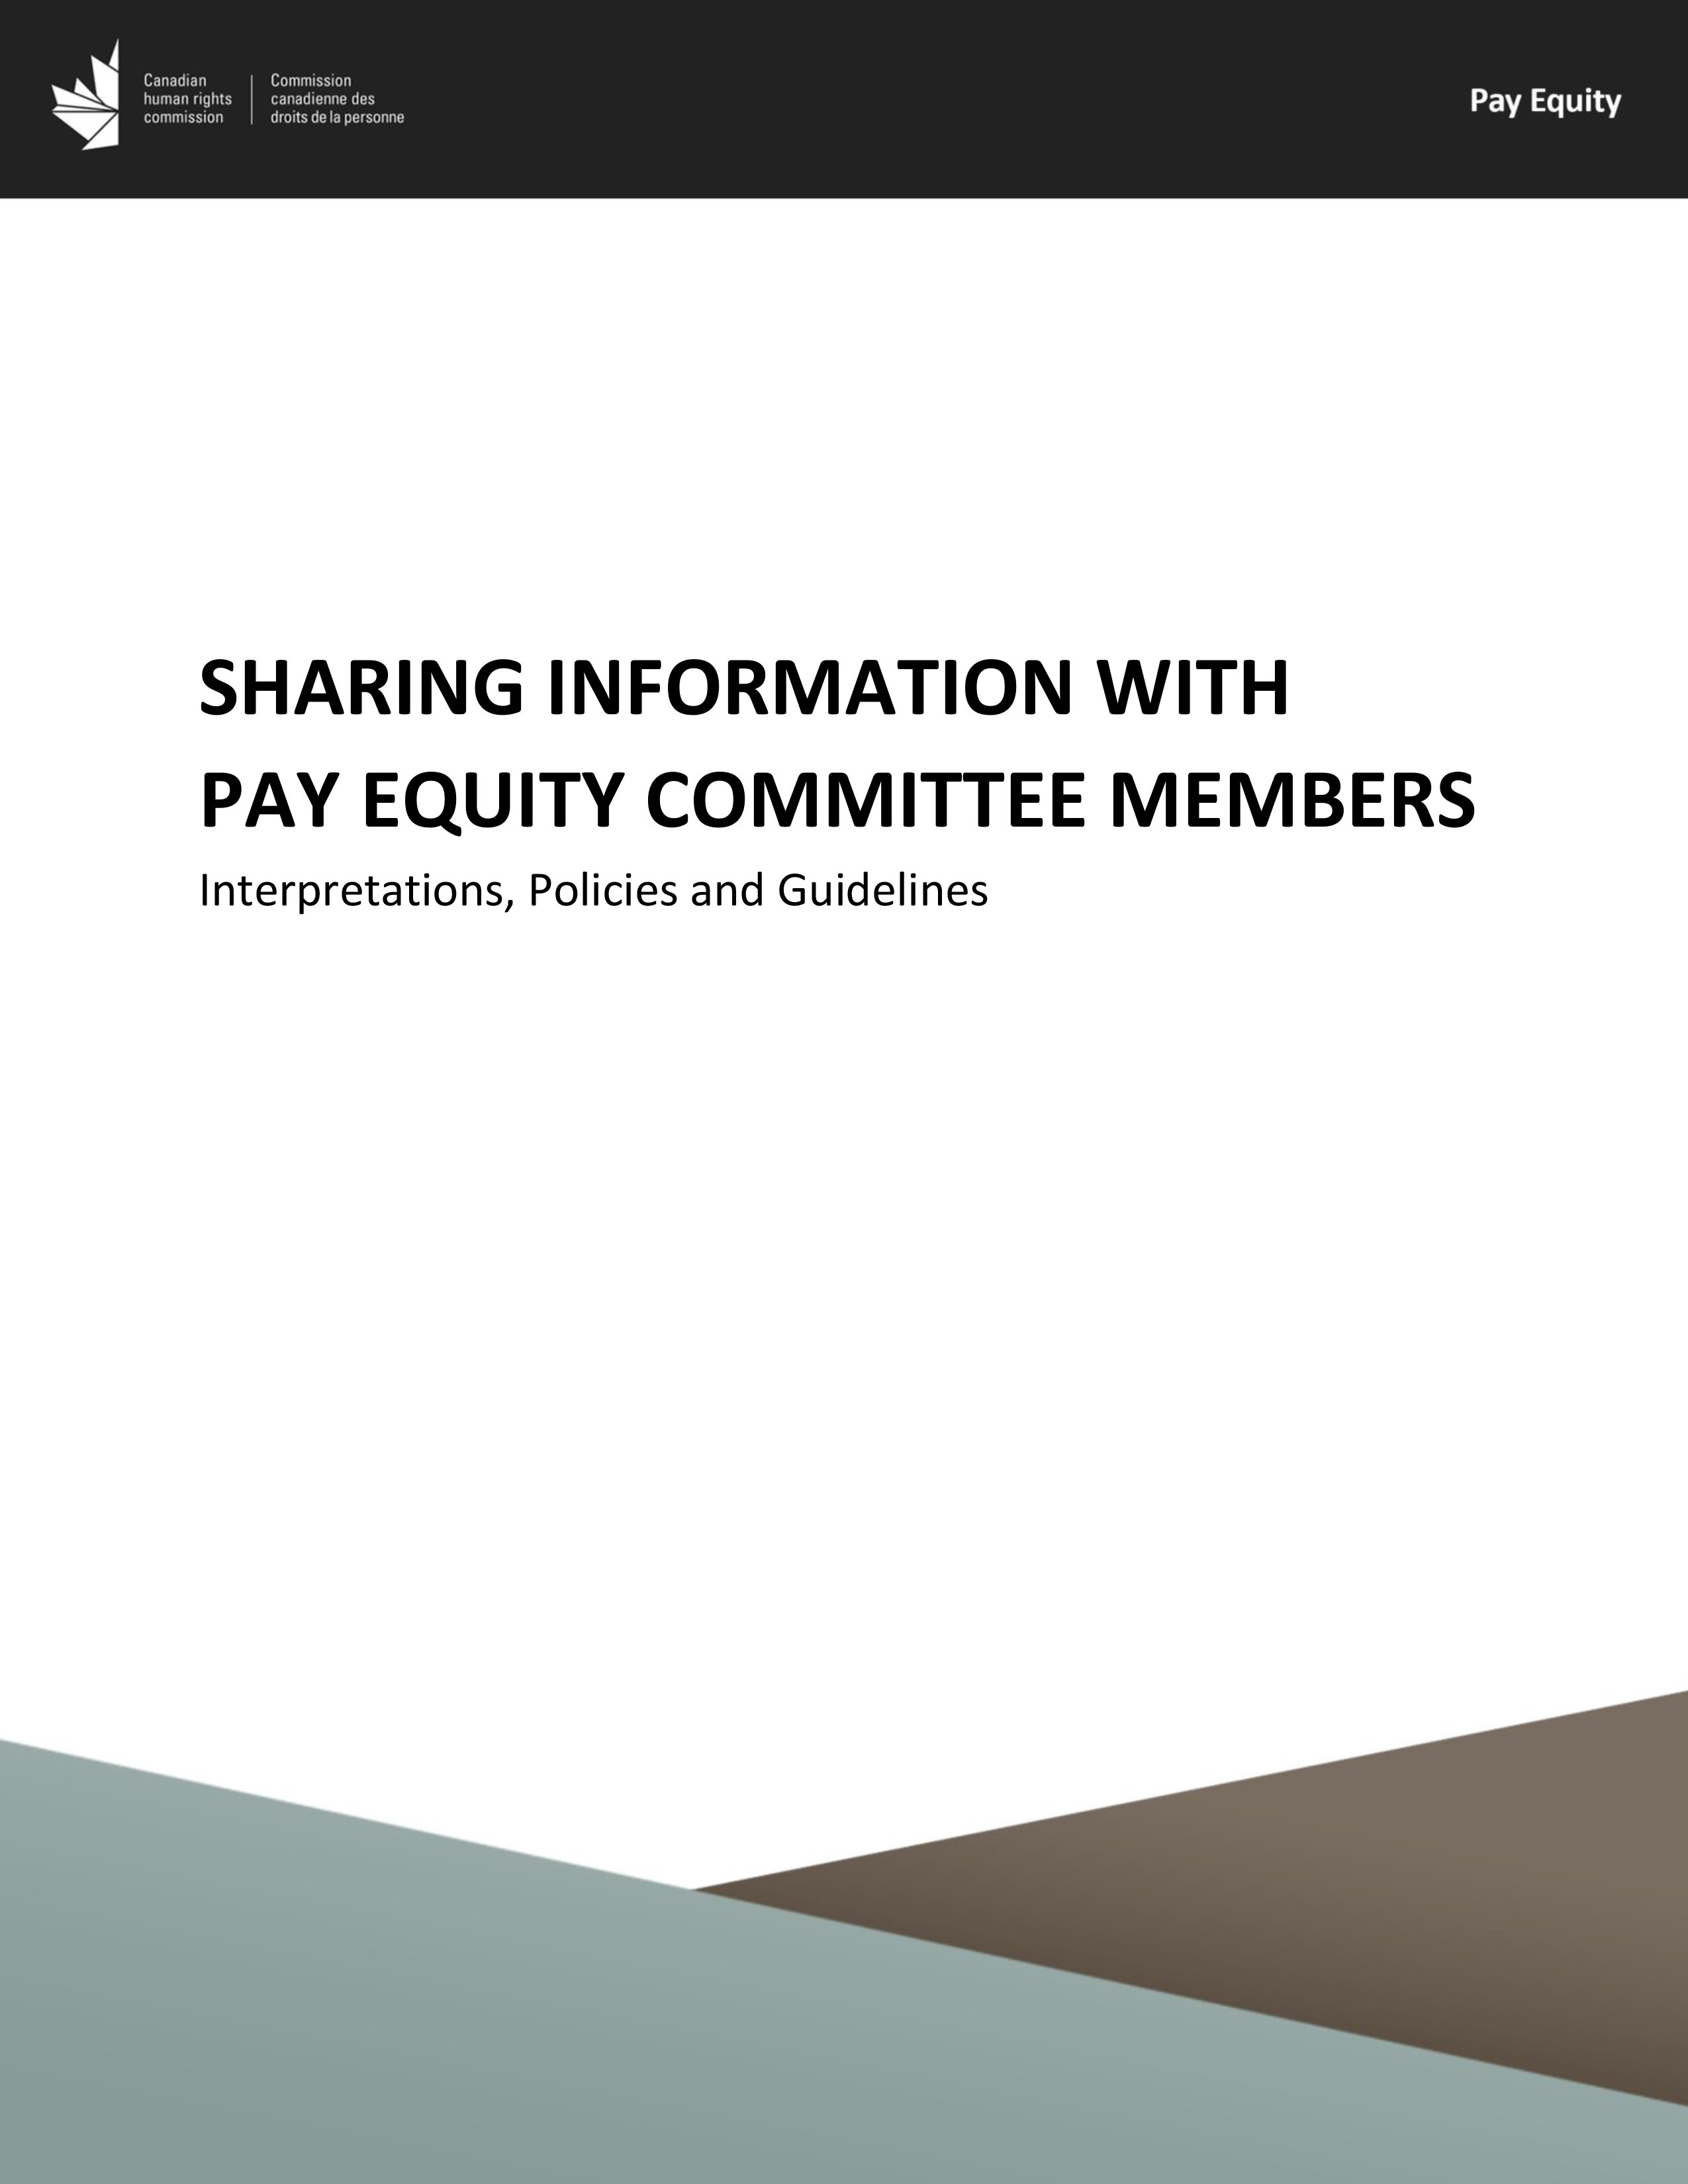 Interpretations, Policies and Guidelines - Sharing Information with Pay Equity Committee Members